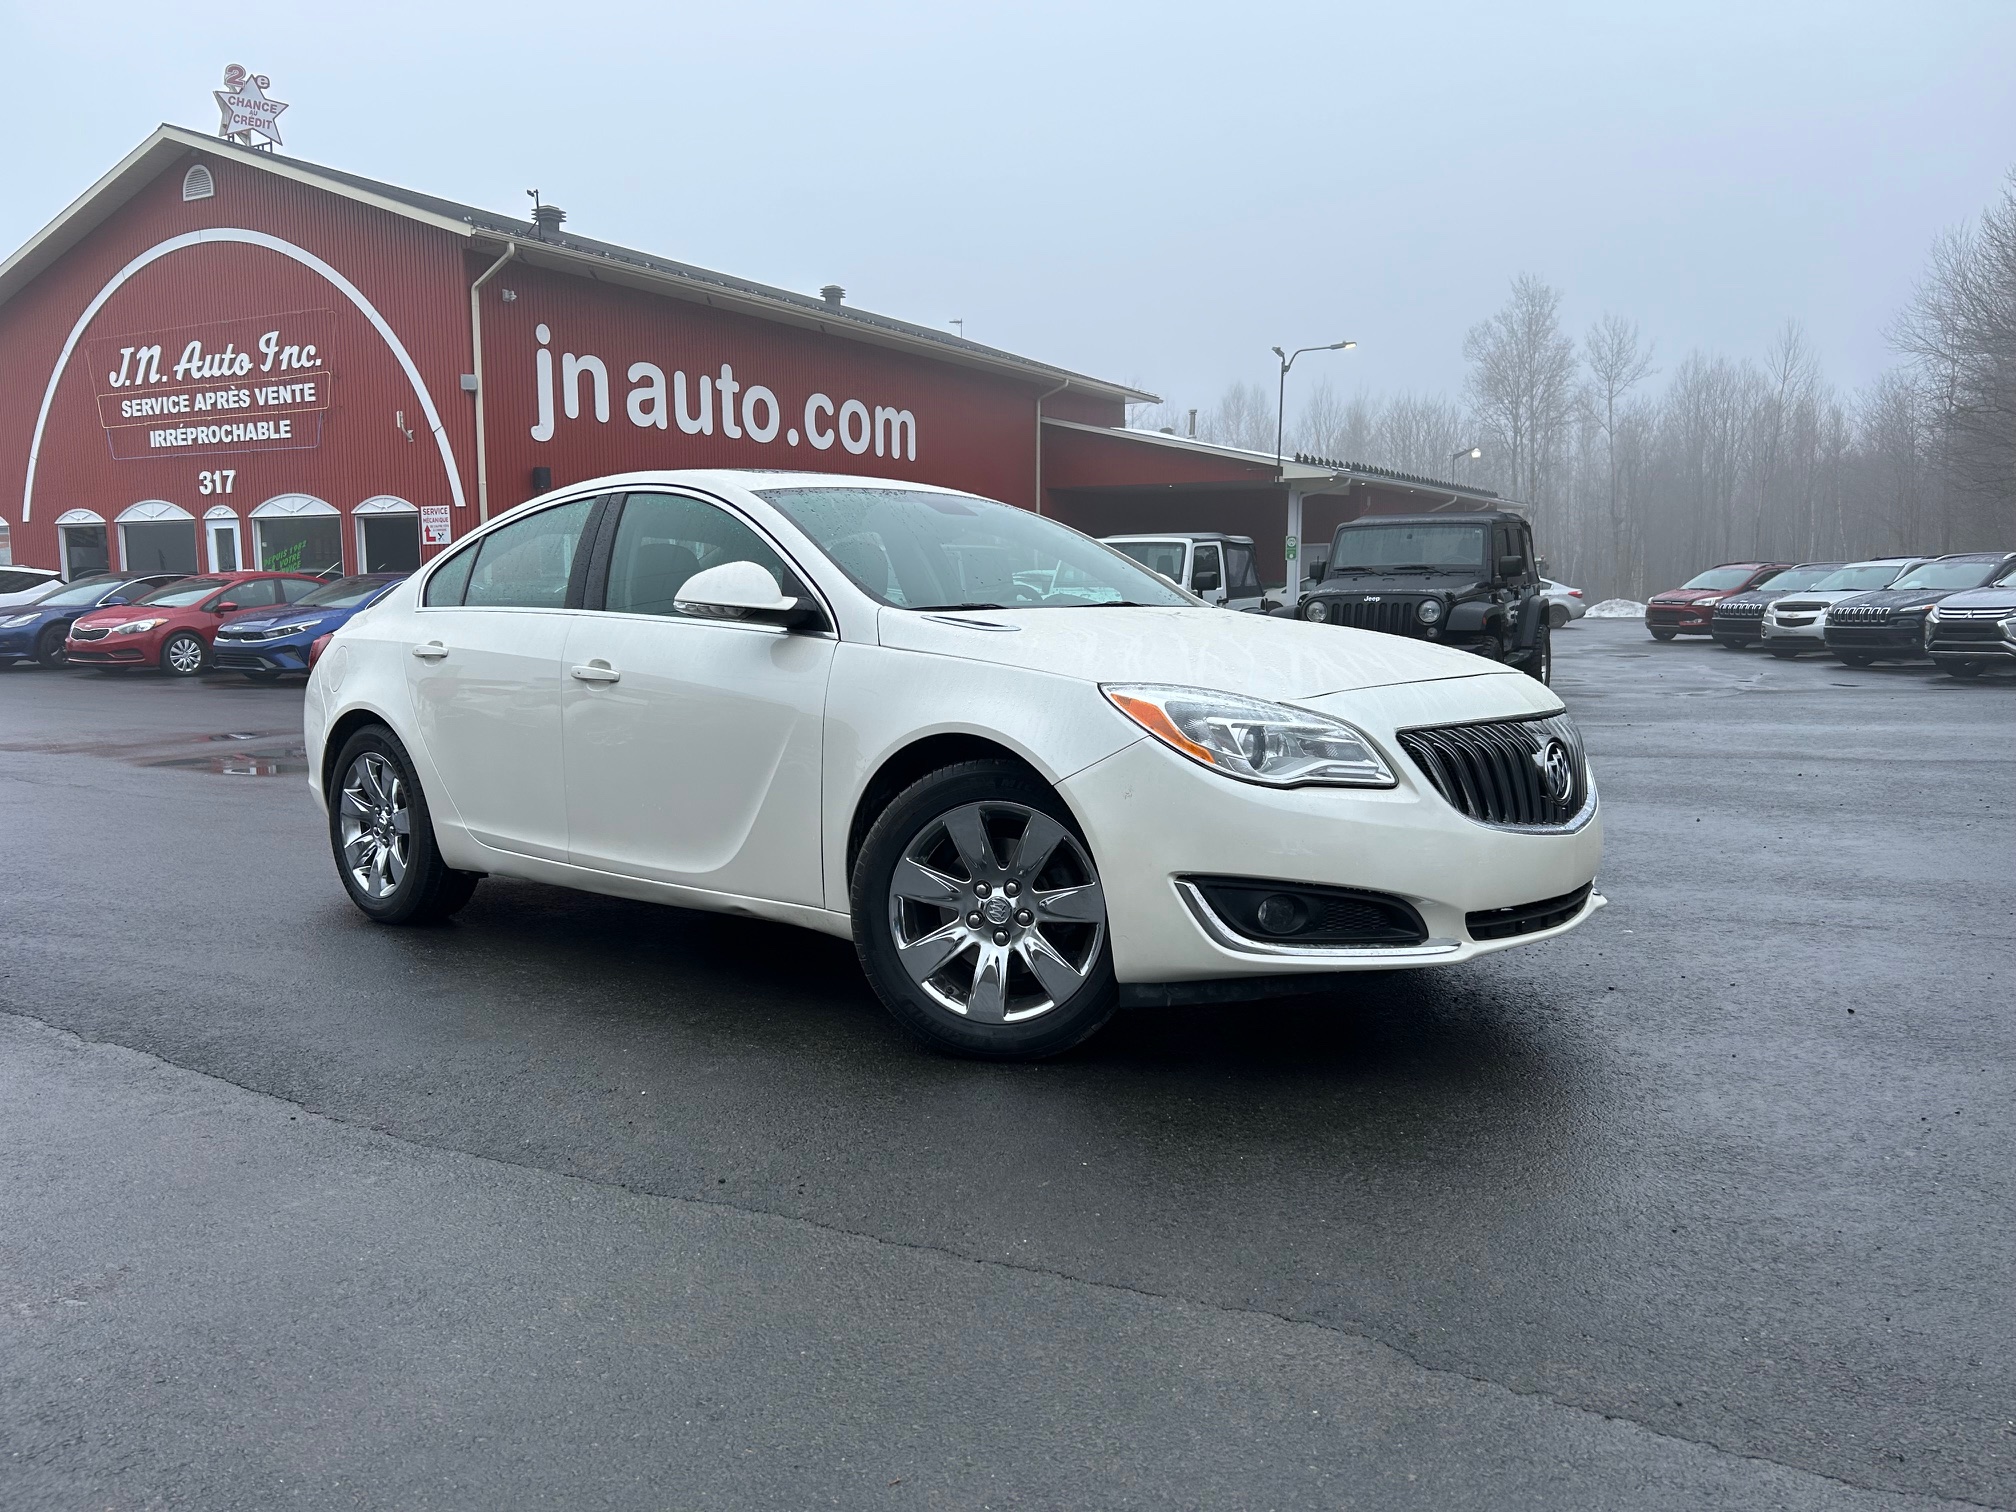 JN auto Buick Regal AWD Toit ouvrant + Cuir 8609392 2015 Image 1